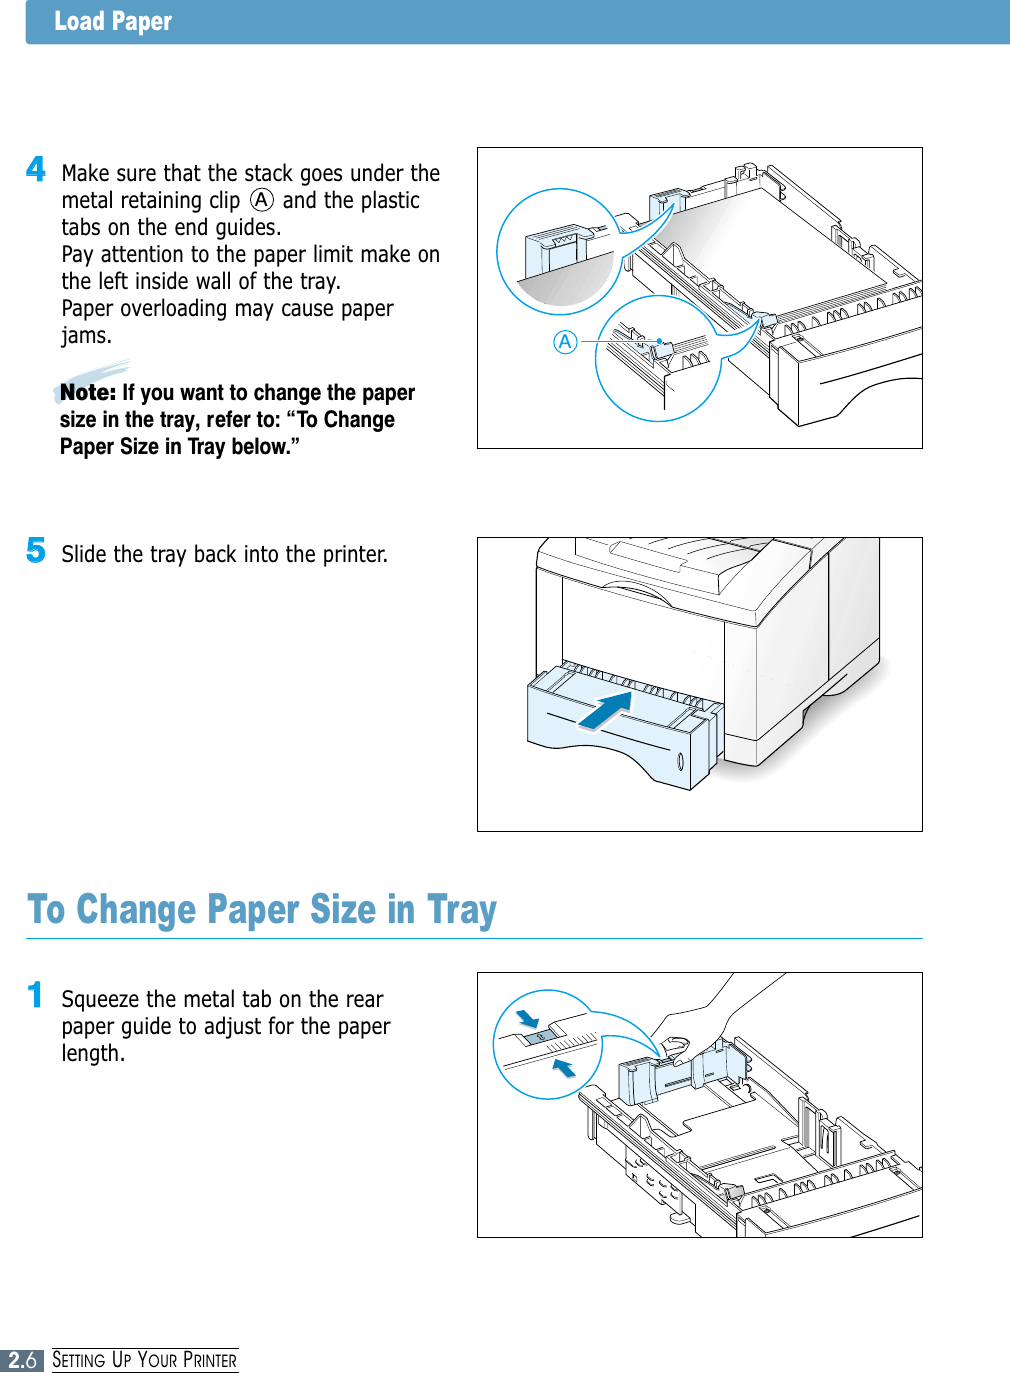 2.6SETTING UPYOUR PRINTER55Slide the tray back into the printer.Note: If you want to change the papersize in the tray, refer to: “To ChangePaper Size in Tray below.”11Squeeze the metal tab on the rearpaper guide to adjust for the paperlength.To Change Paper Size in Tray44Make sure that the stack goes under themetal retaining clip      and the plastictabs on the end guides. Pay attention to the paper limit make onthe left inside wall of the tray.Paper overloading may cause paperjams.AALoad Paper